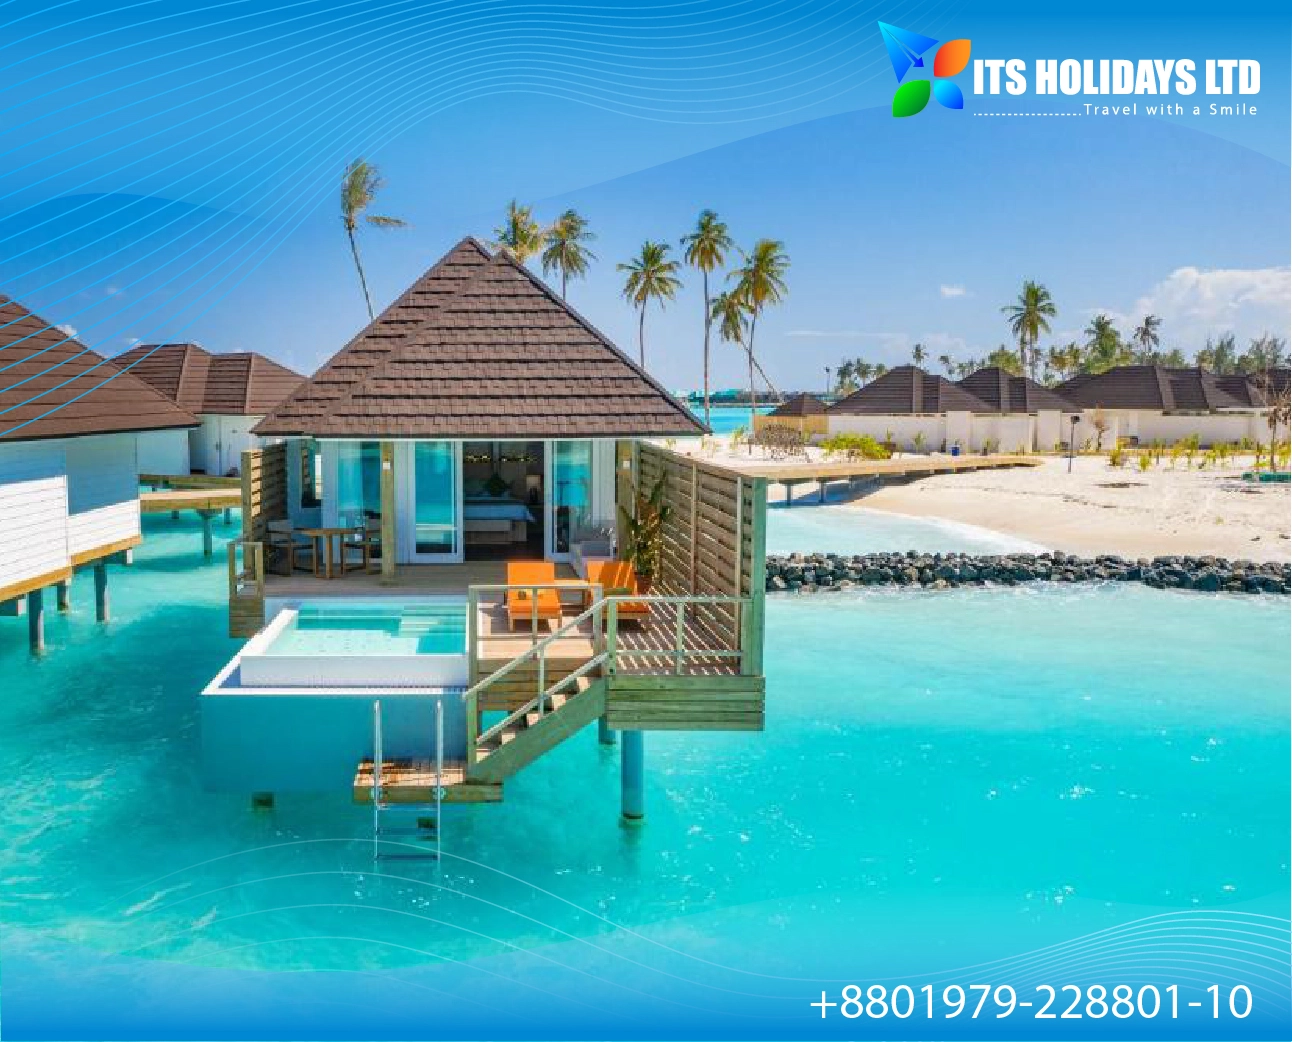 City Break Maldives Tour Package from Bangladesh - 2